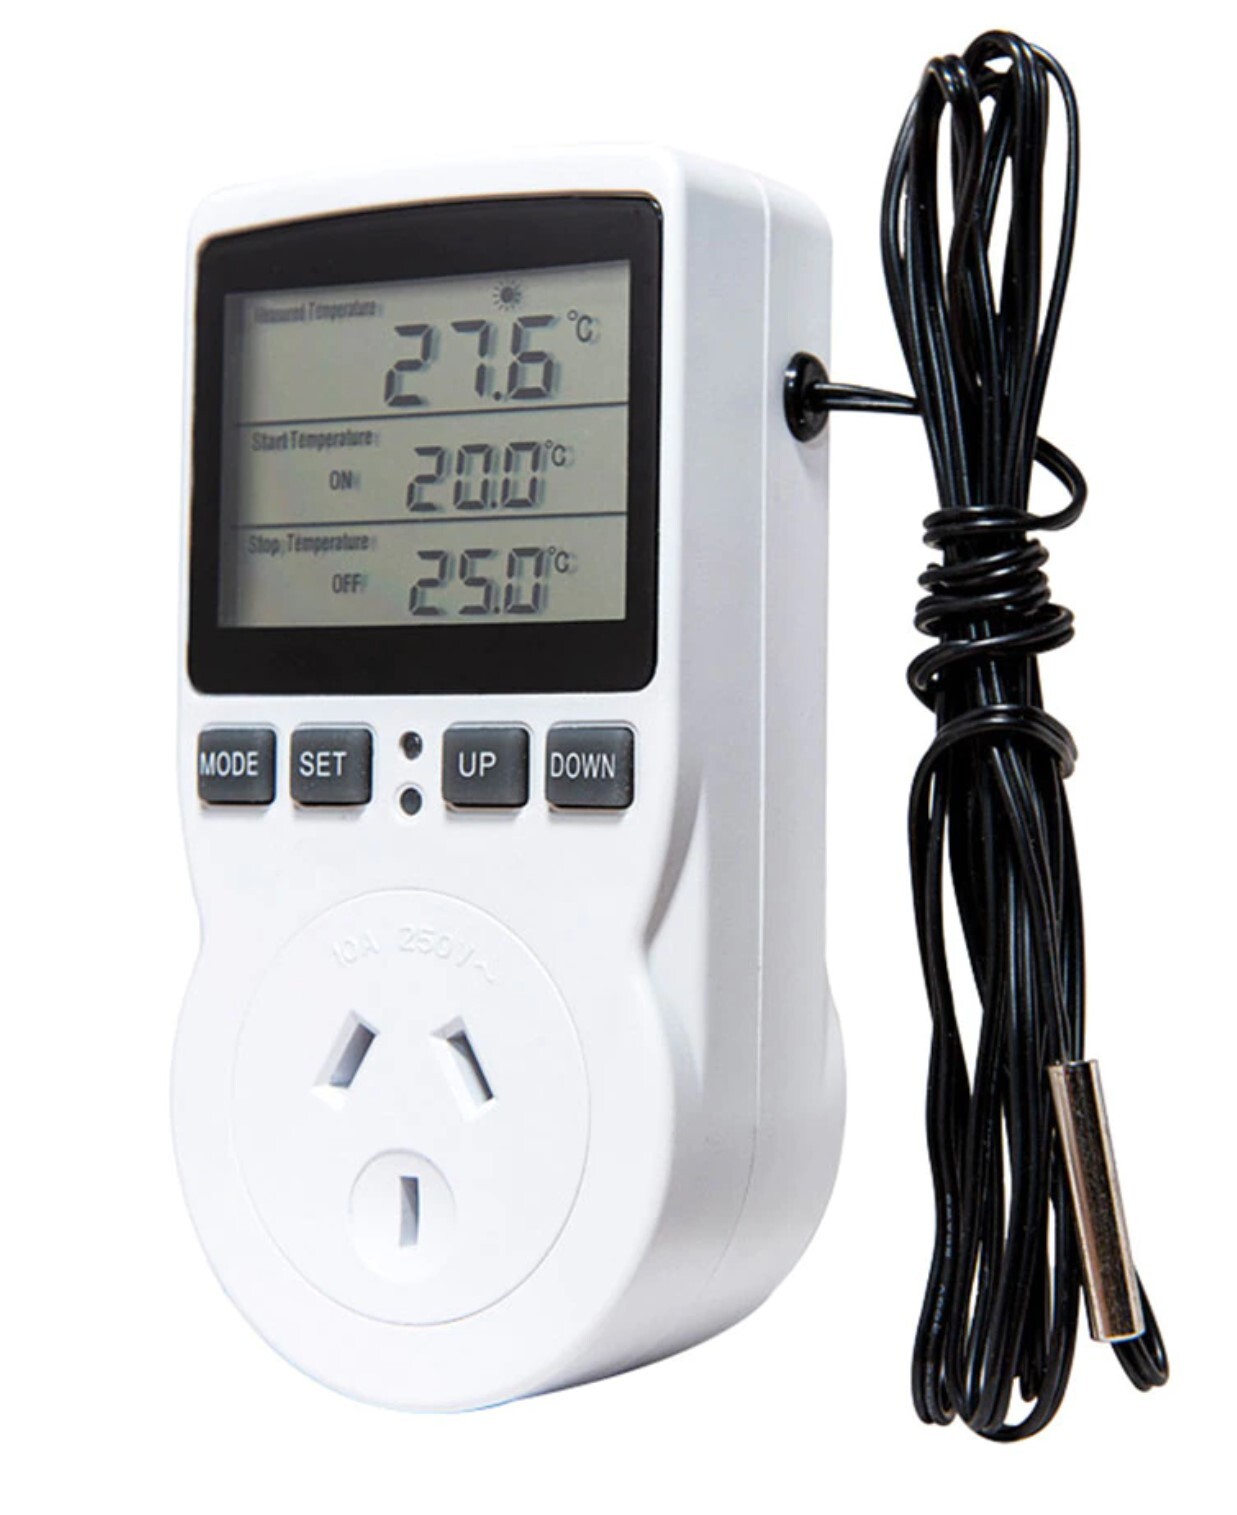 plug in thermostat - heating and cooling for fans and heatmats 240V